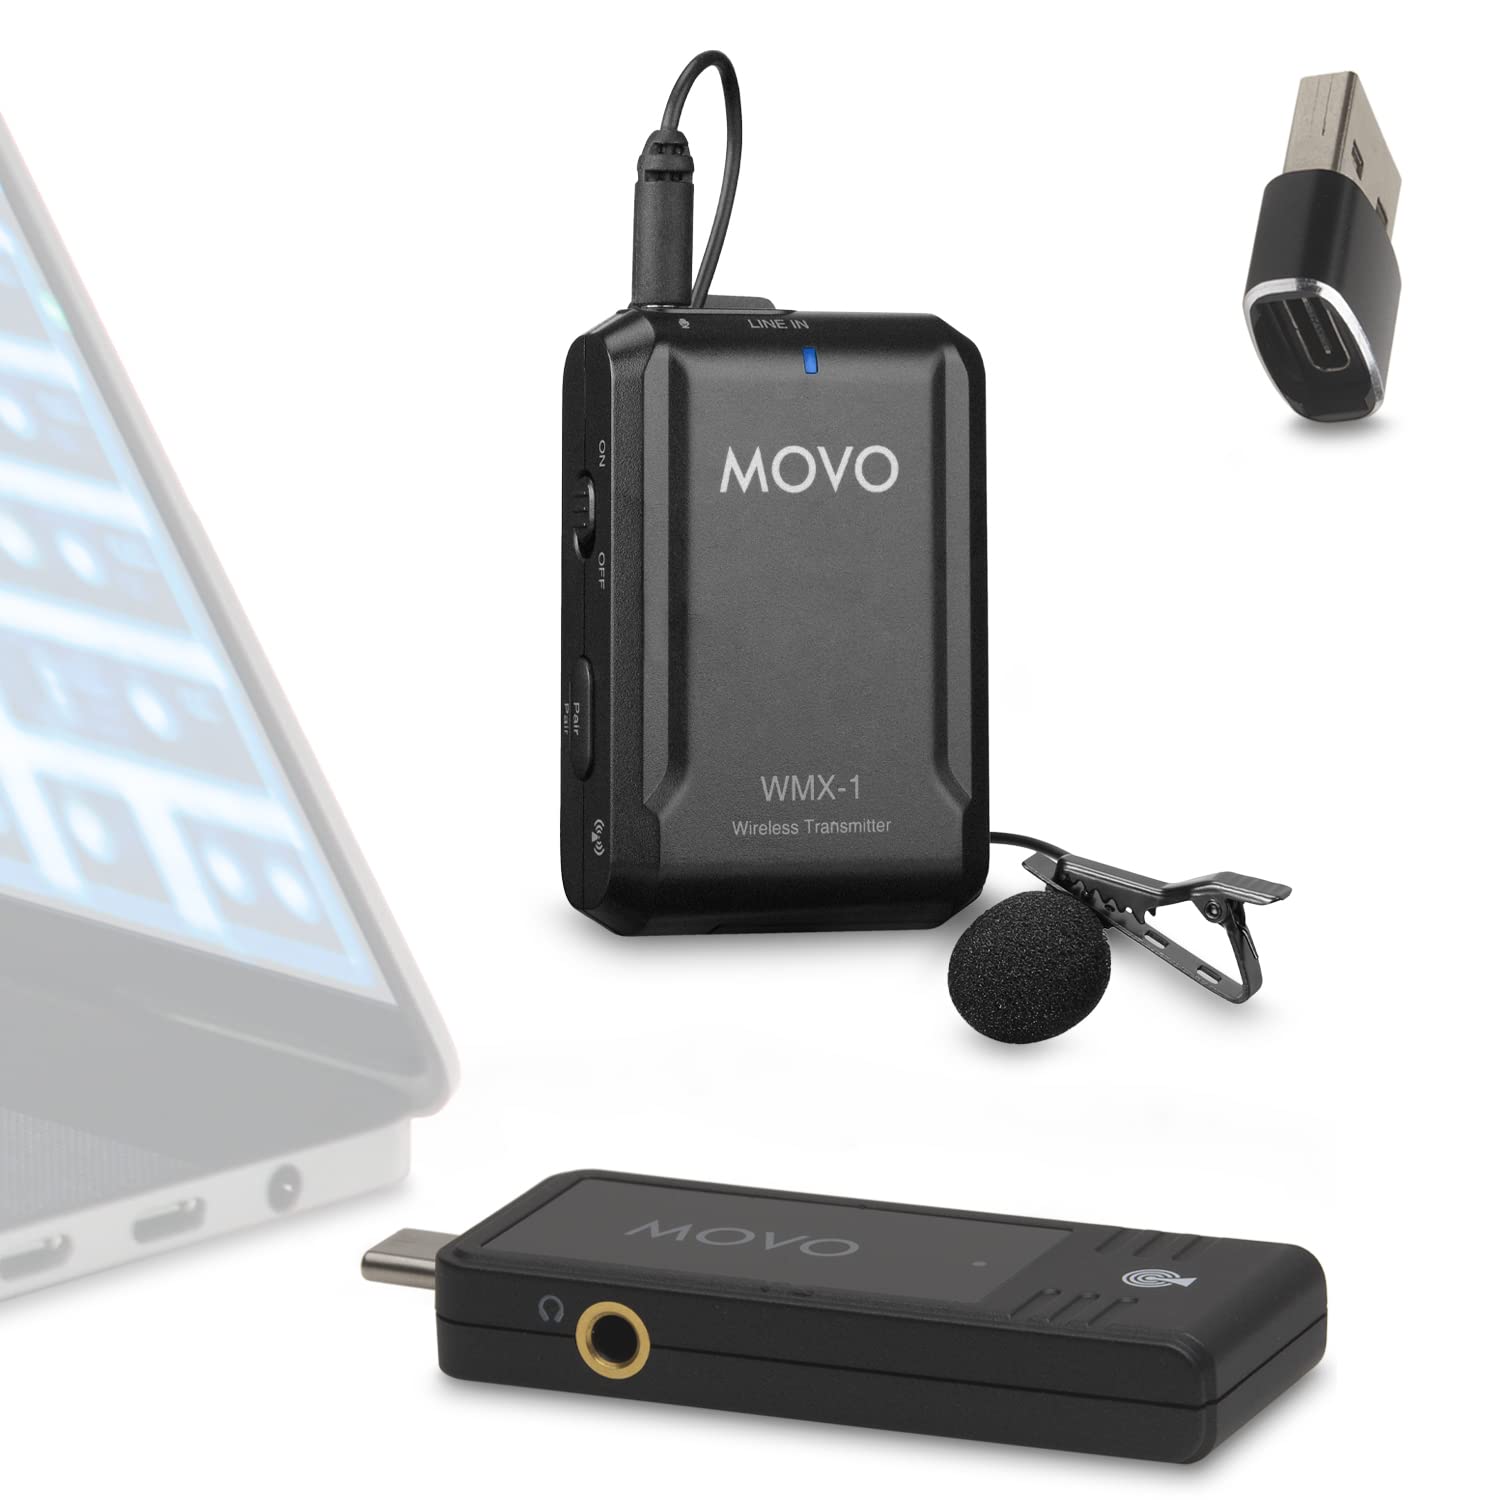 Movo WMX-1-UL USB-C Wireless Lavalier Microphone- USB Wireless Lapel Microphone for Computer, Smartphones, and Tablets- Wireless USB & USB-C Receiver, Transmitter, and Omnidirectional Lav Microphone  - Like New